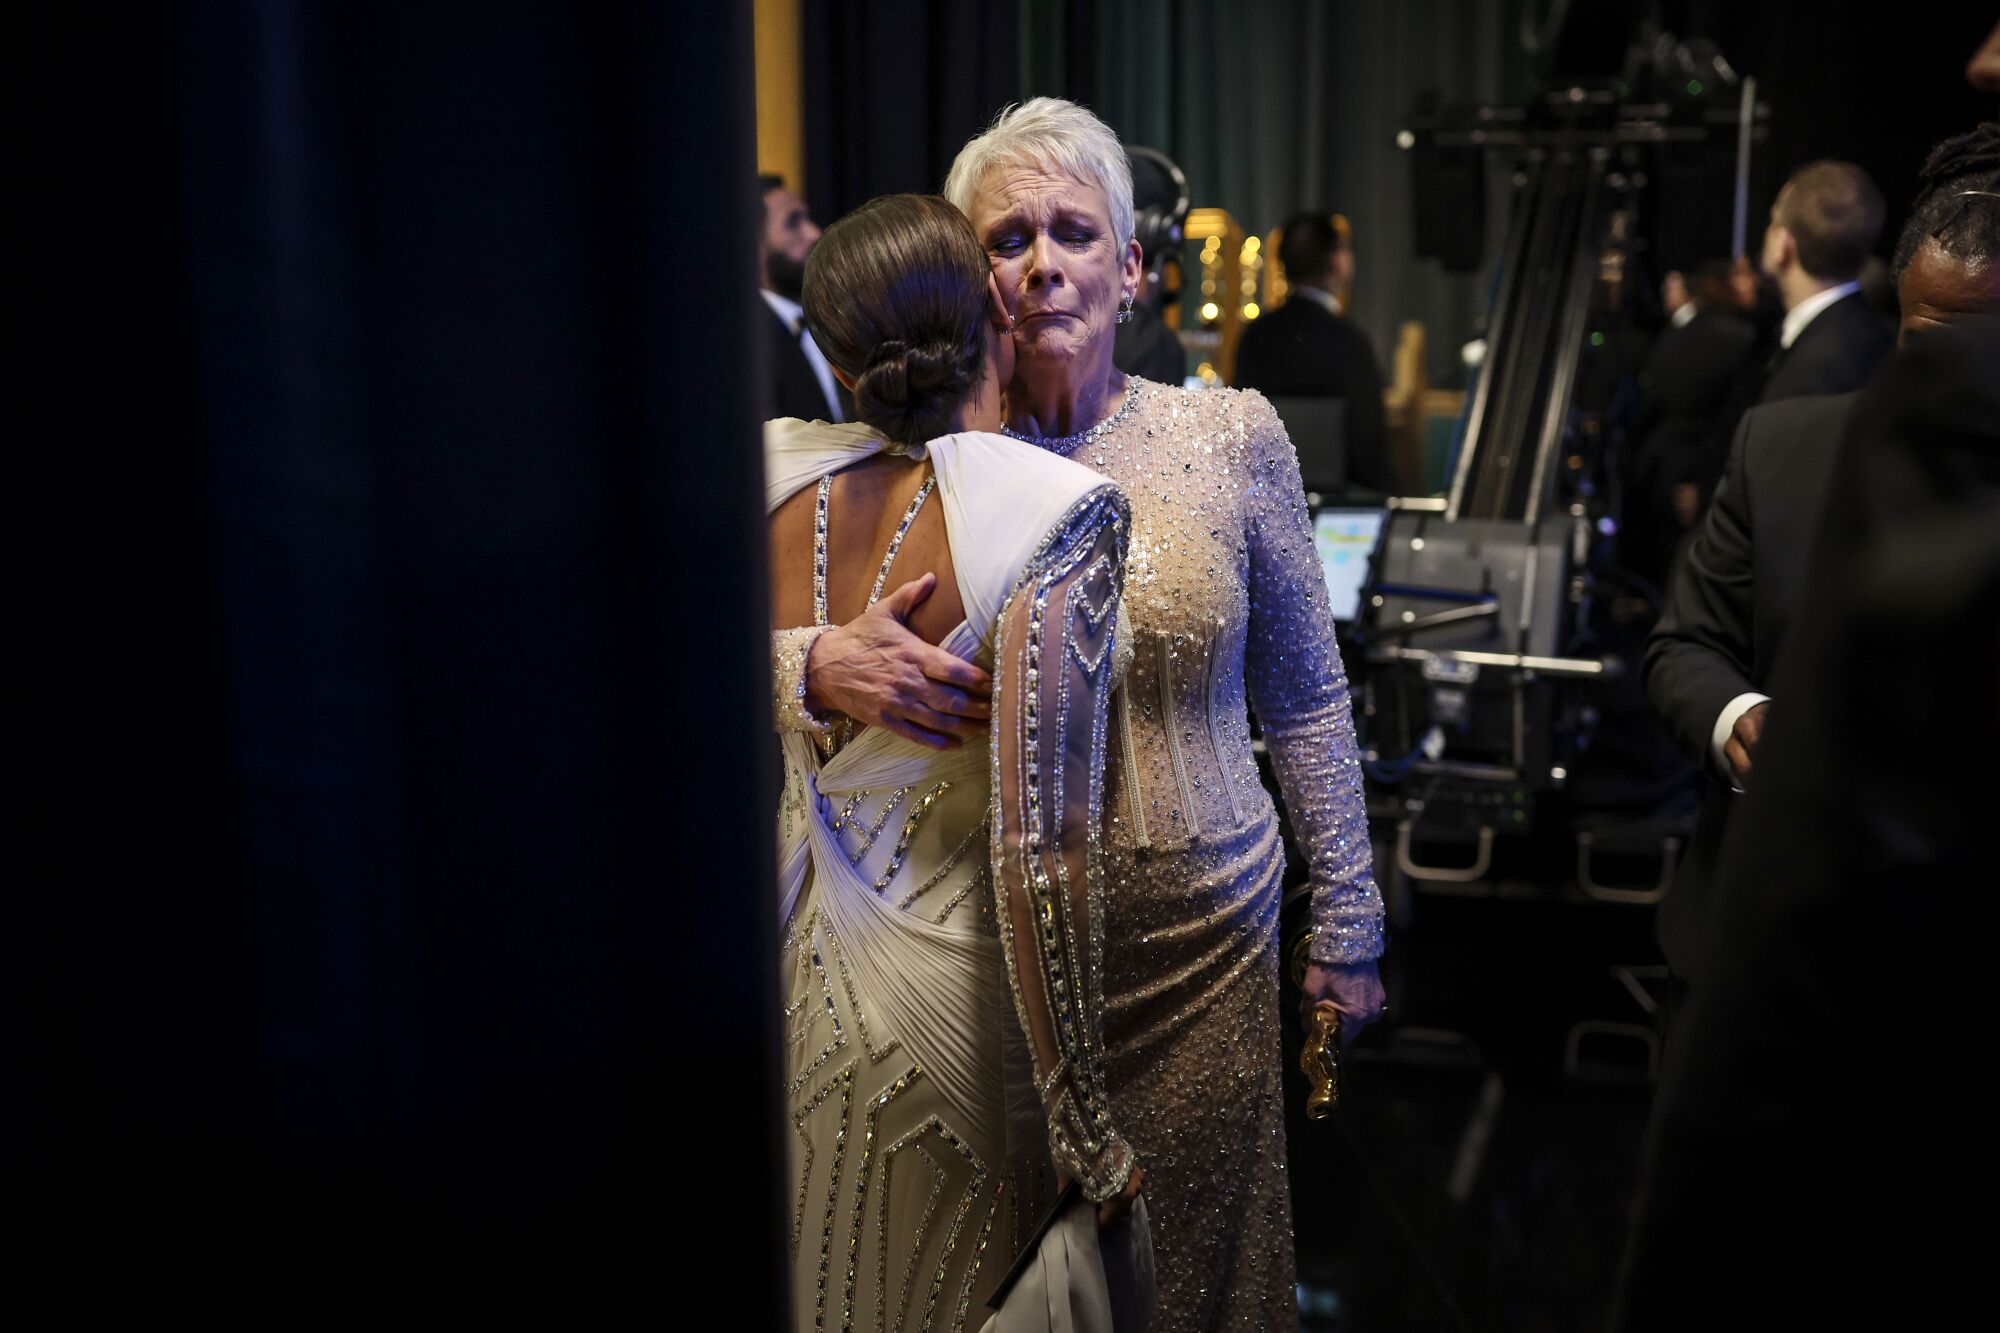 A woman comforts a tearful woman backstage at the Oscars.